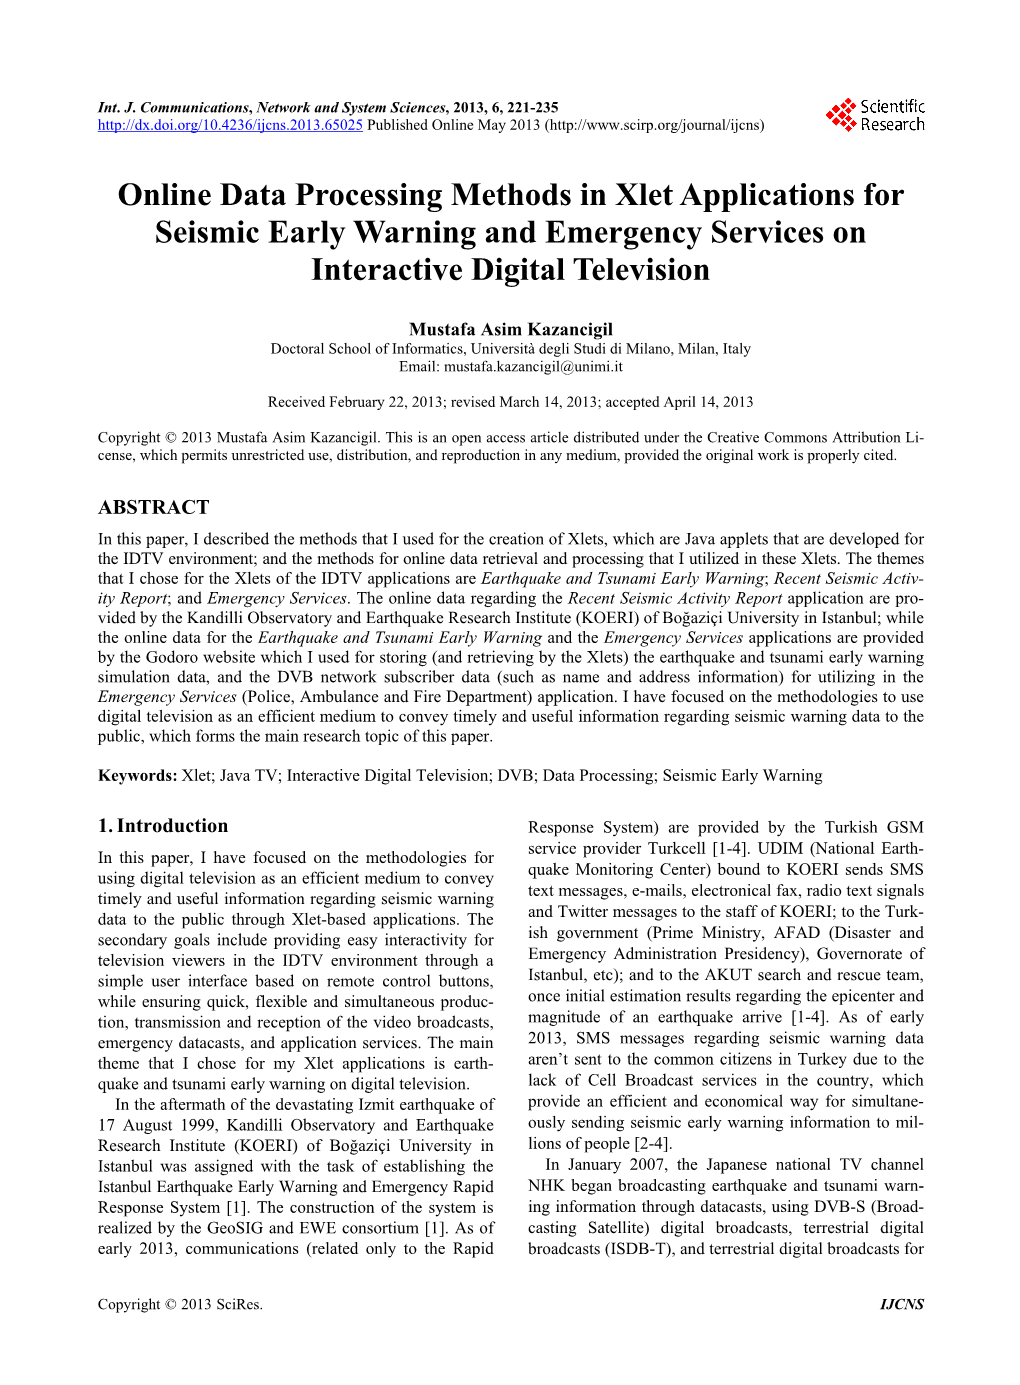 Online Data Processing Methods in Xlet Applications for Seismic Early Warning and Emergency Services on Interactive Digital Television